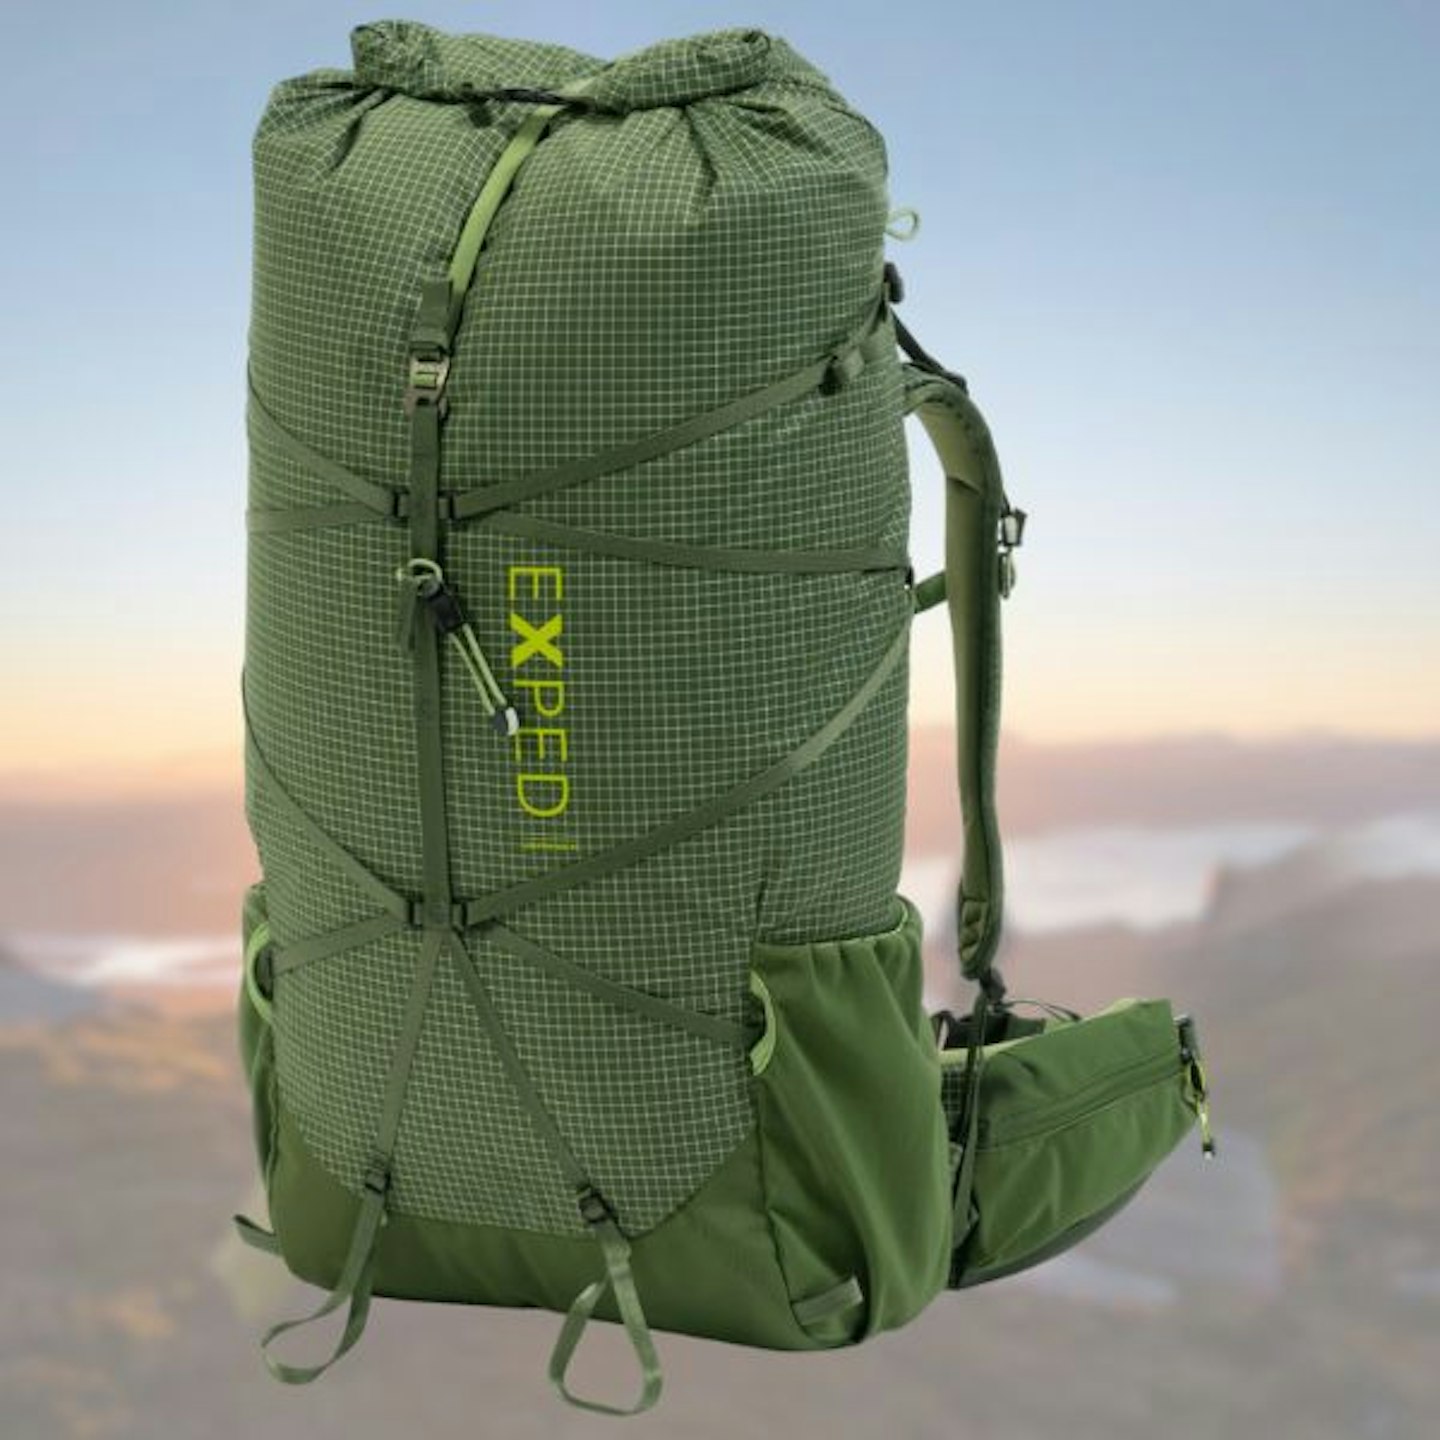 Best Overnight Hiking Backpack with Rain Coat